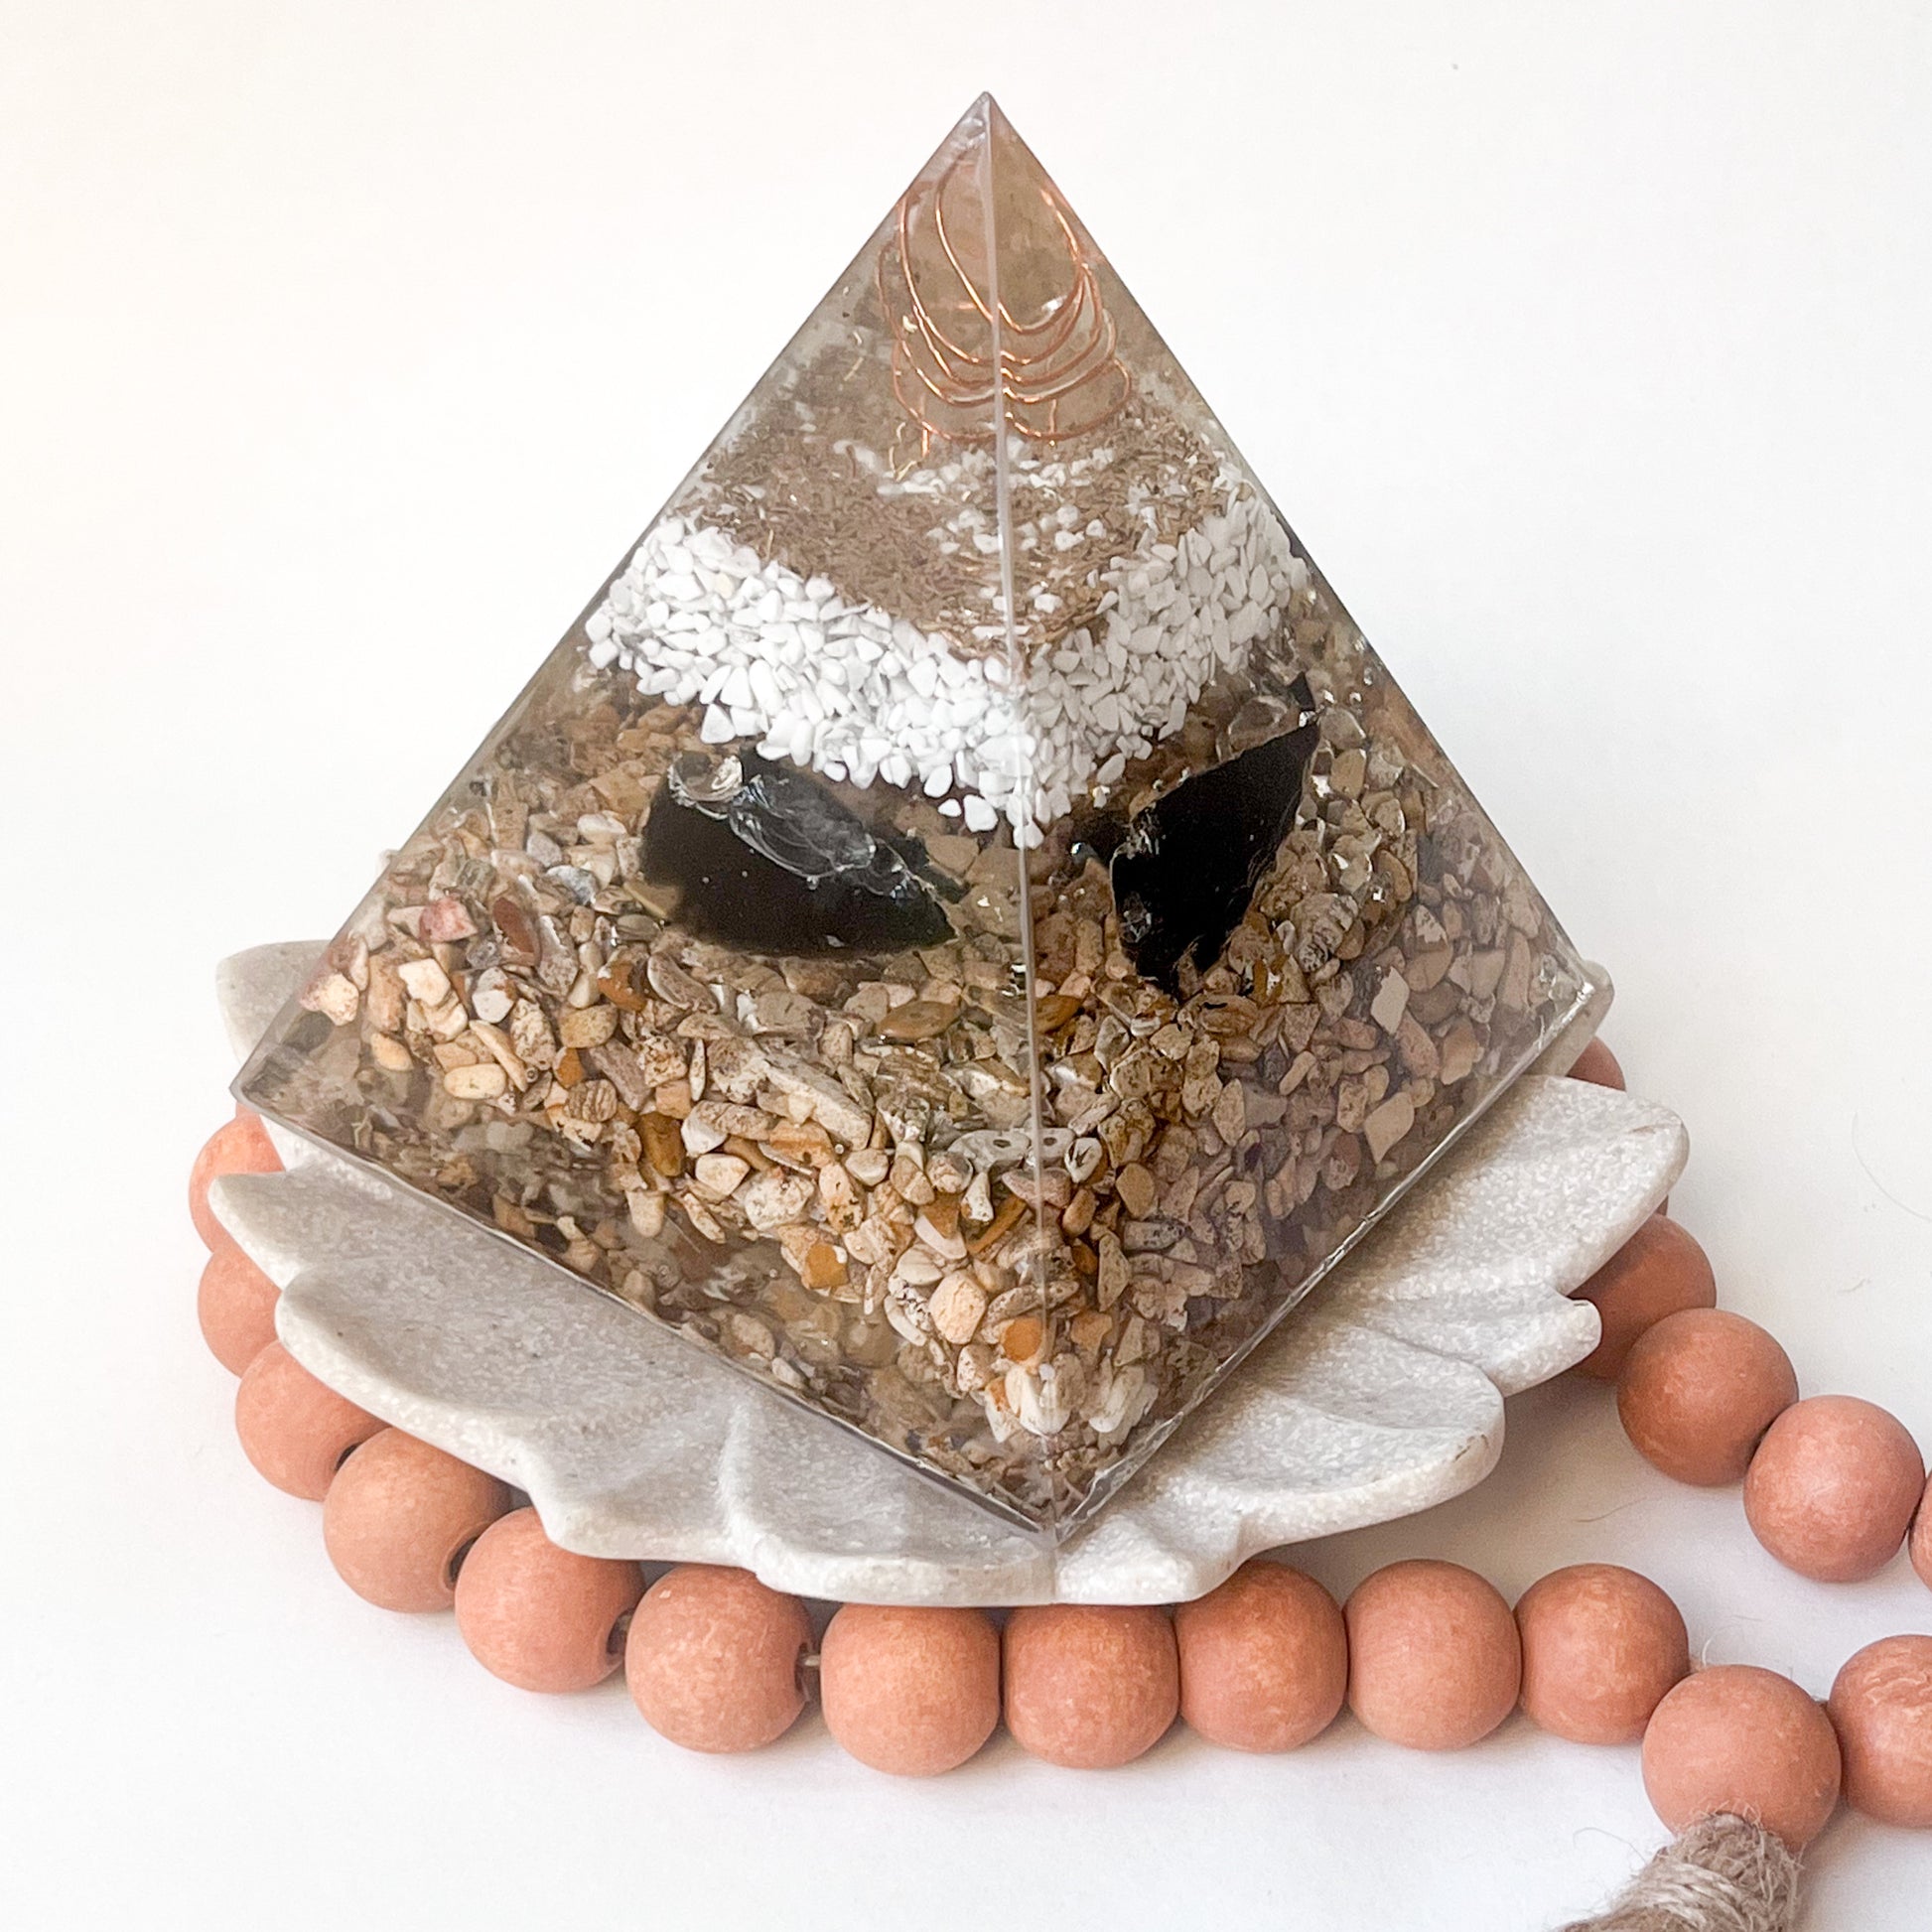 "Elegant orgonite pyramid for clearing negative energy and promoting positivity in your space with arrowheads